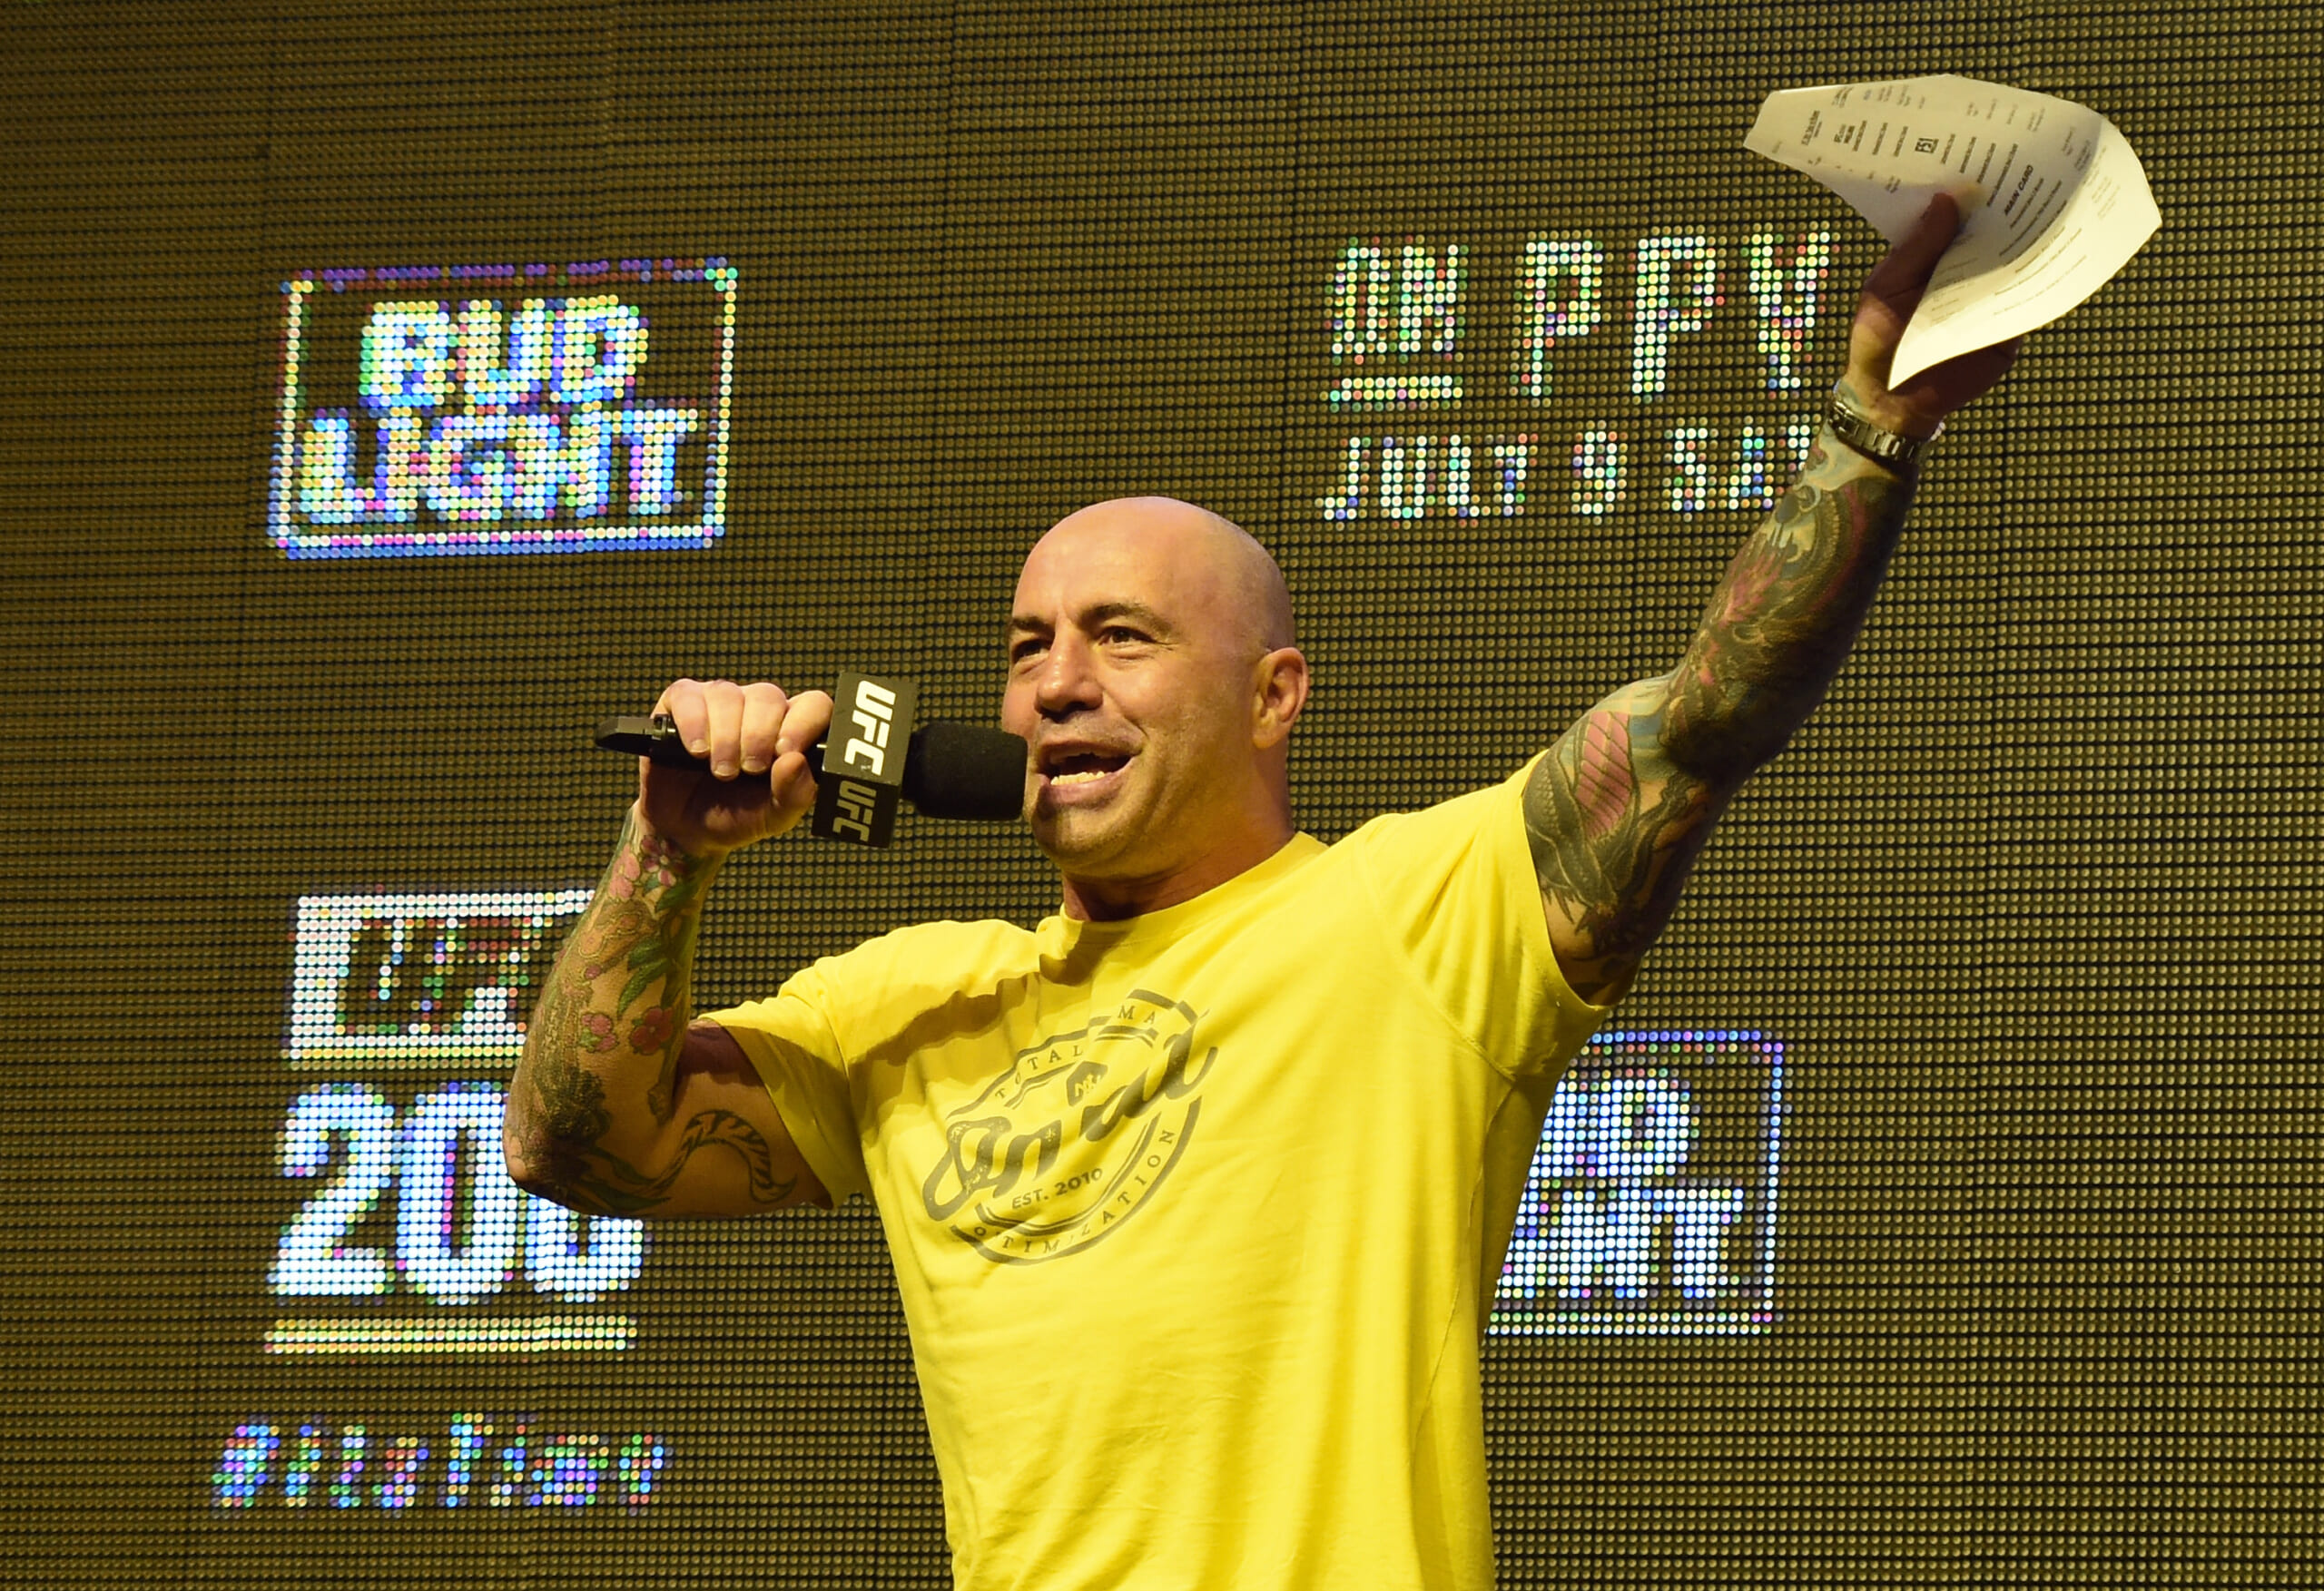 Commentator Joe Rogan speaks during weigh-ins for a UFC event.